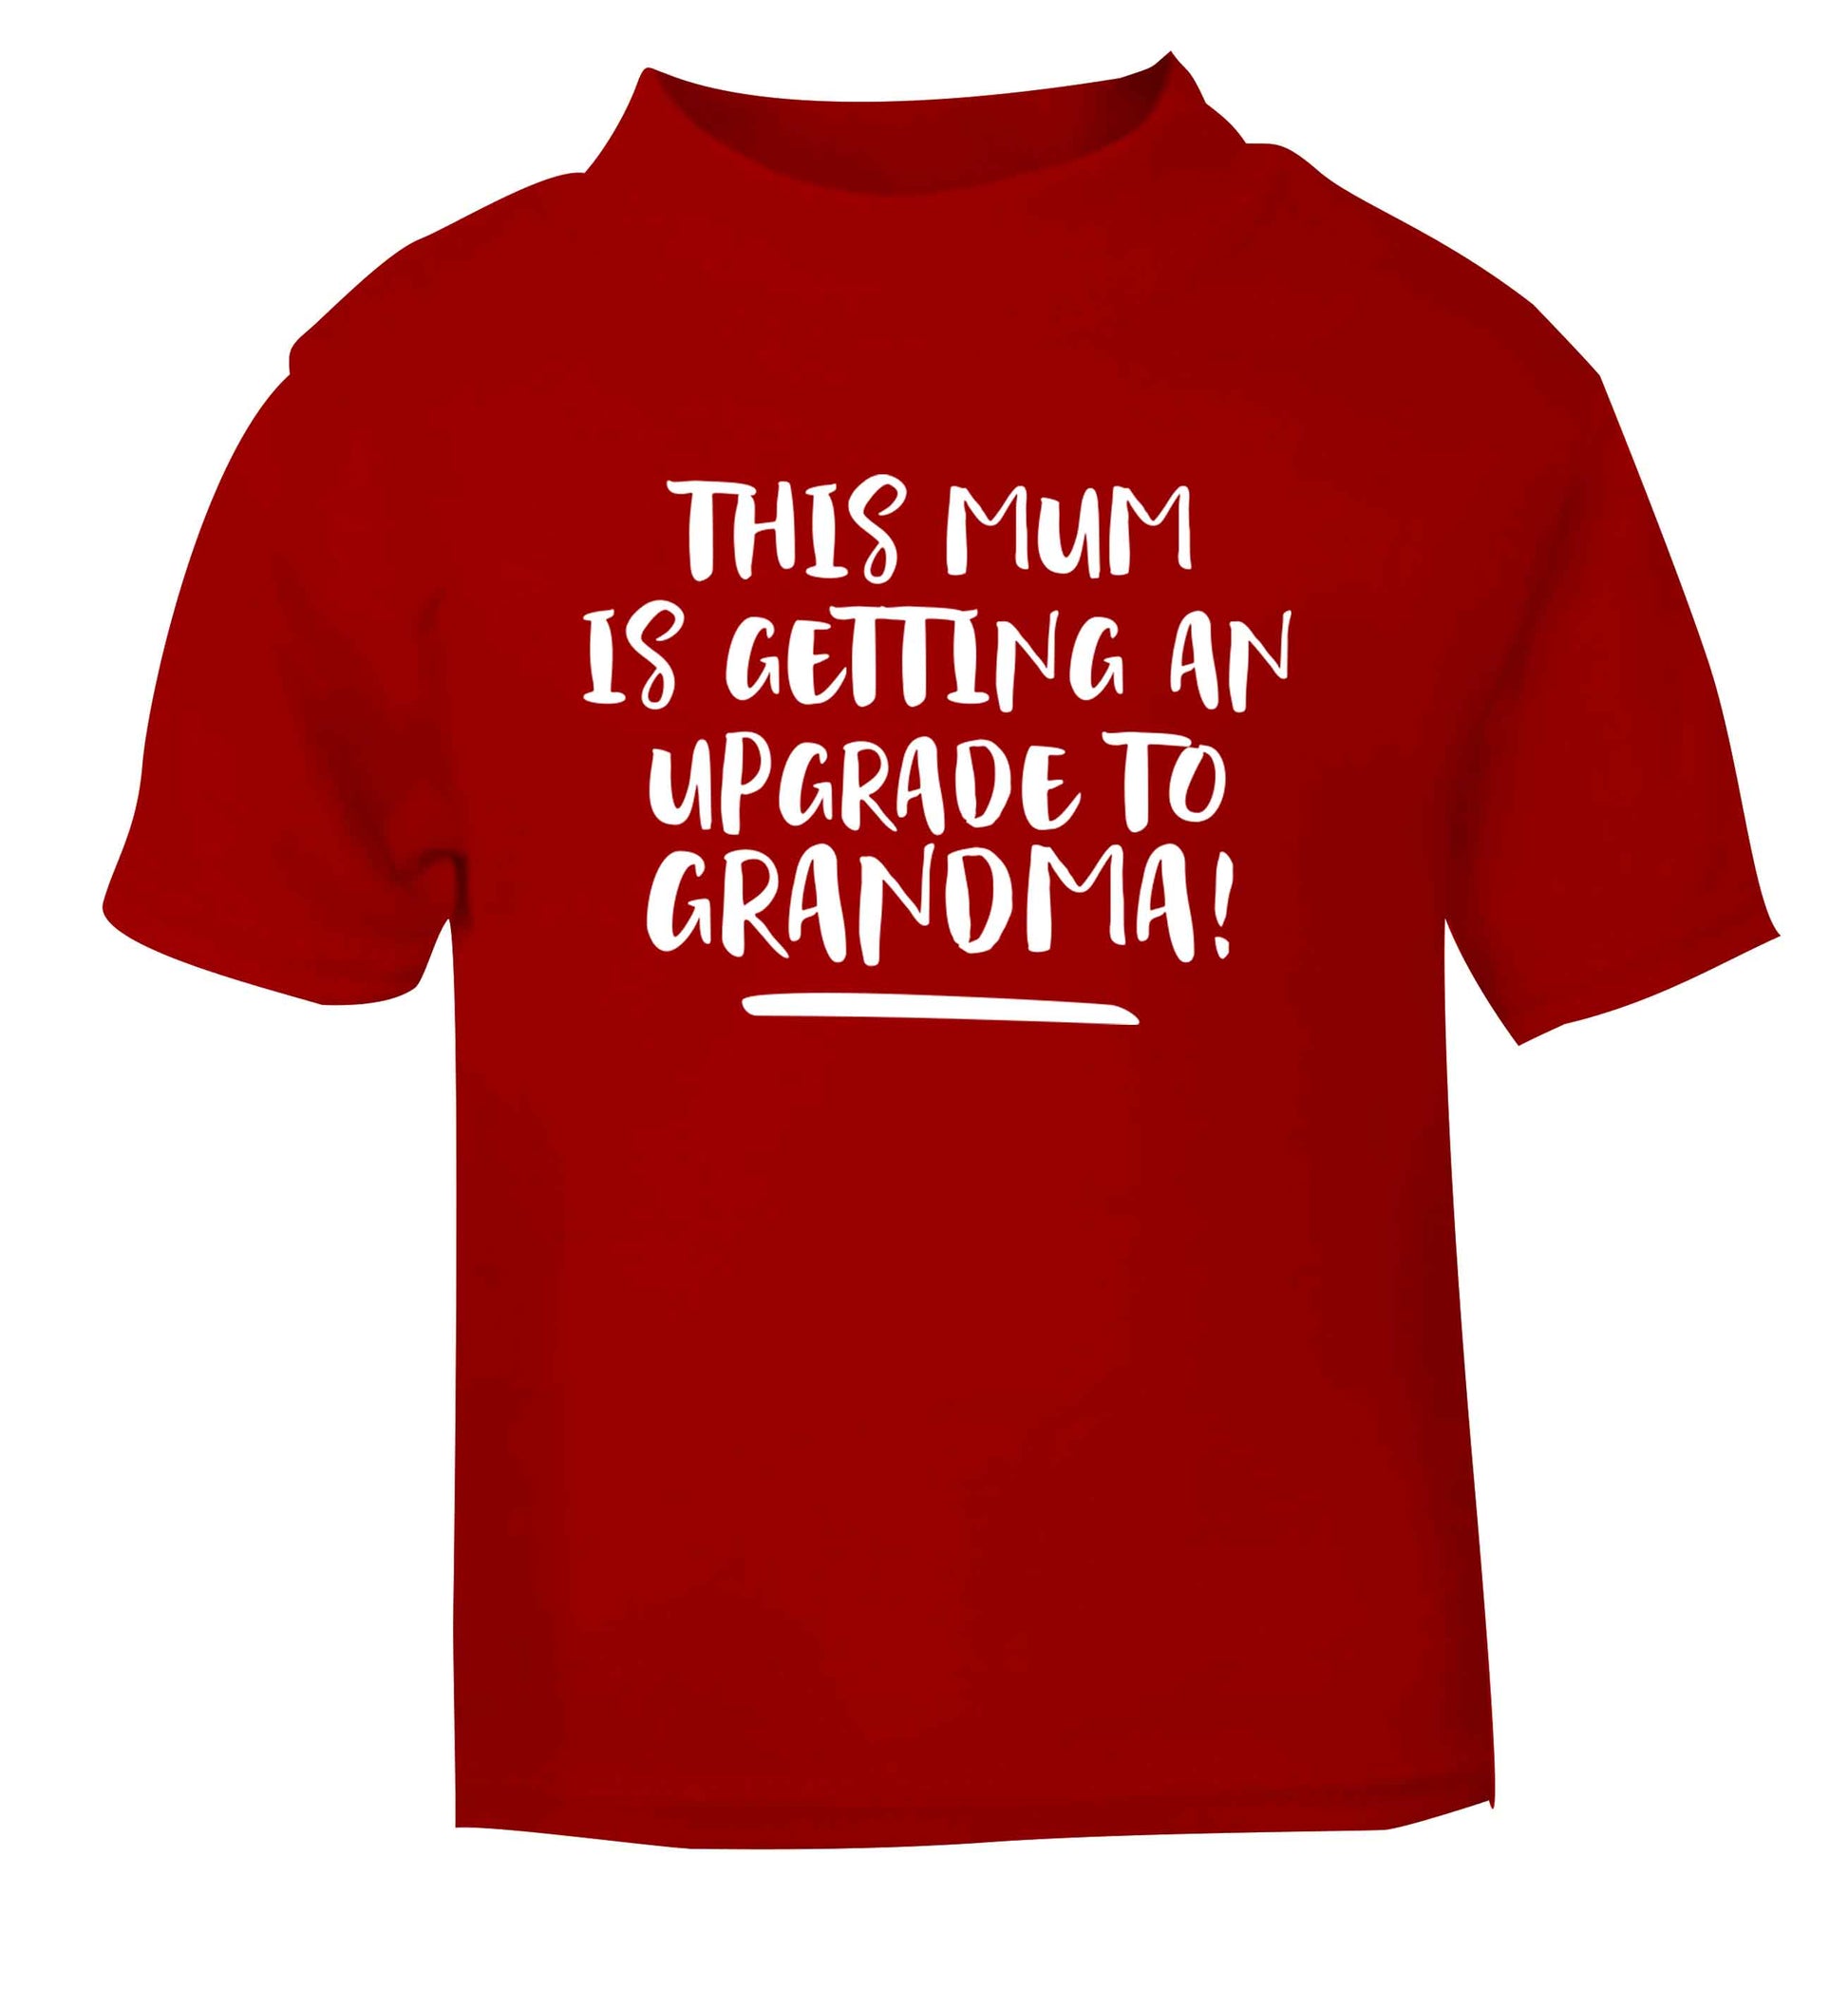 This mum is getting an upgrade to grandma! red Baby Toddler Tshirt 2 Years